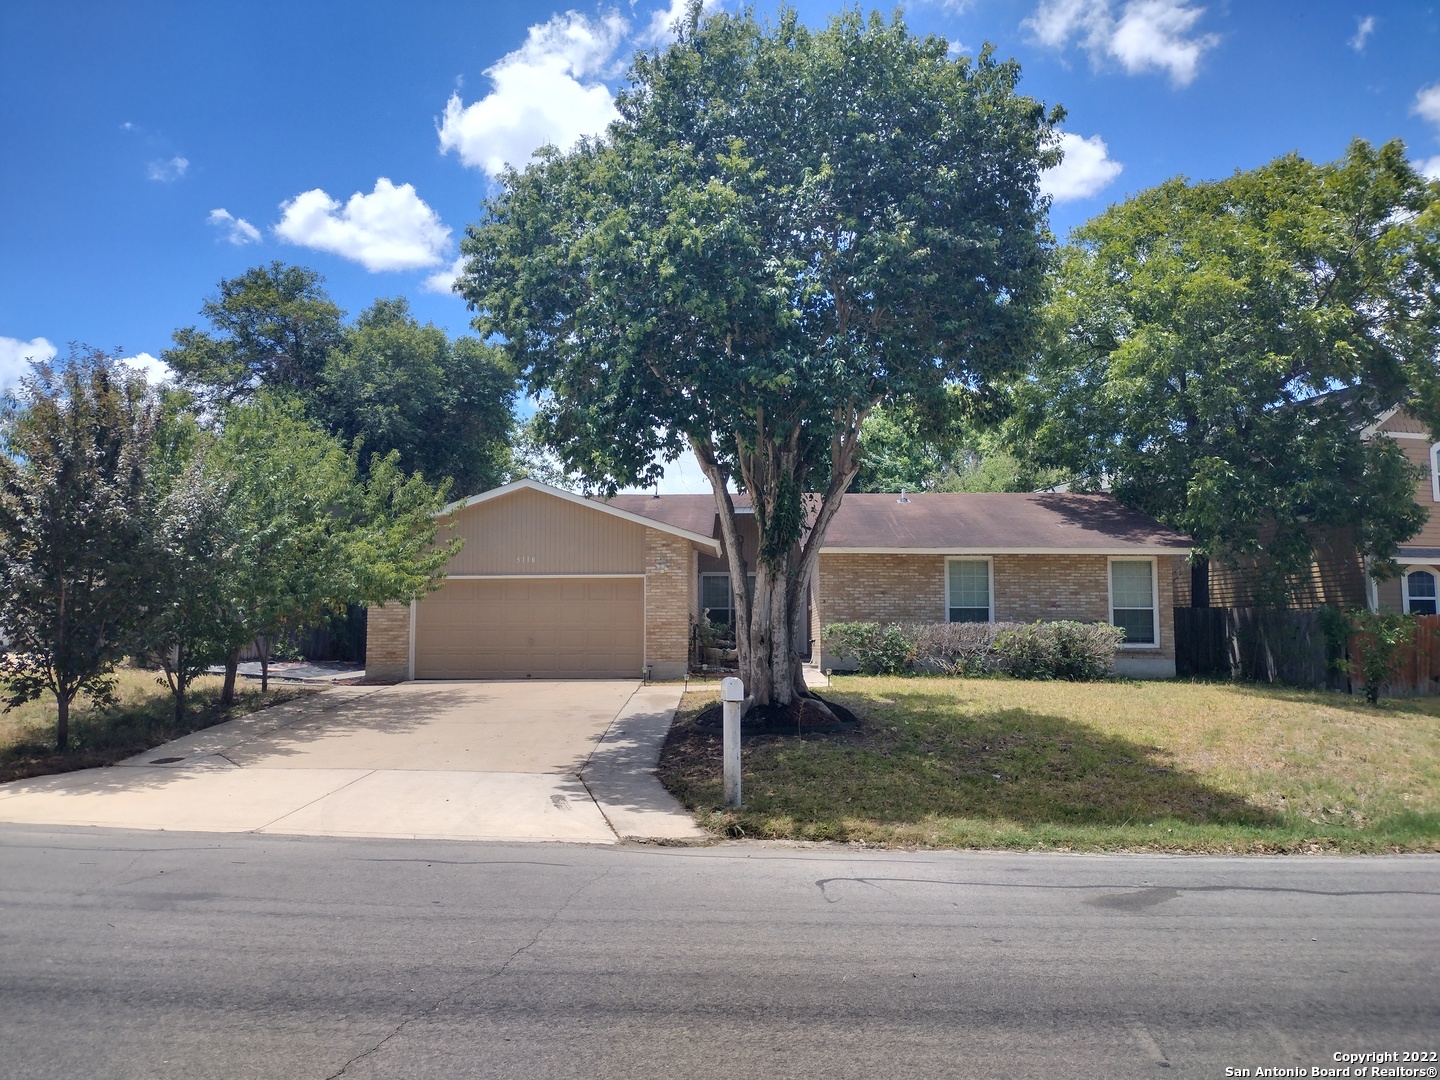 Great Location updated house 3 bedroom, 2 bath, 2 car garage , Fresh paint, tile whole house, Huge kitchen with updated cabinets and granite , bathrooms updated . It is beautiful  and must see, close to medical center and St. Mary's university and all major shopping